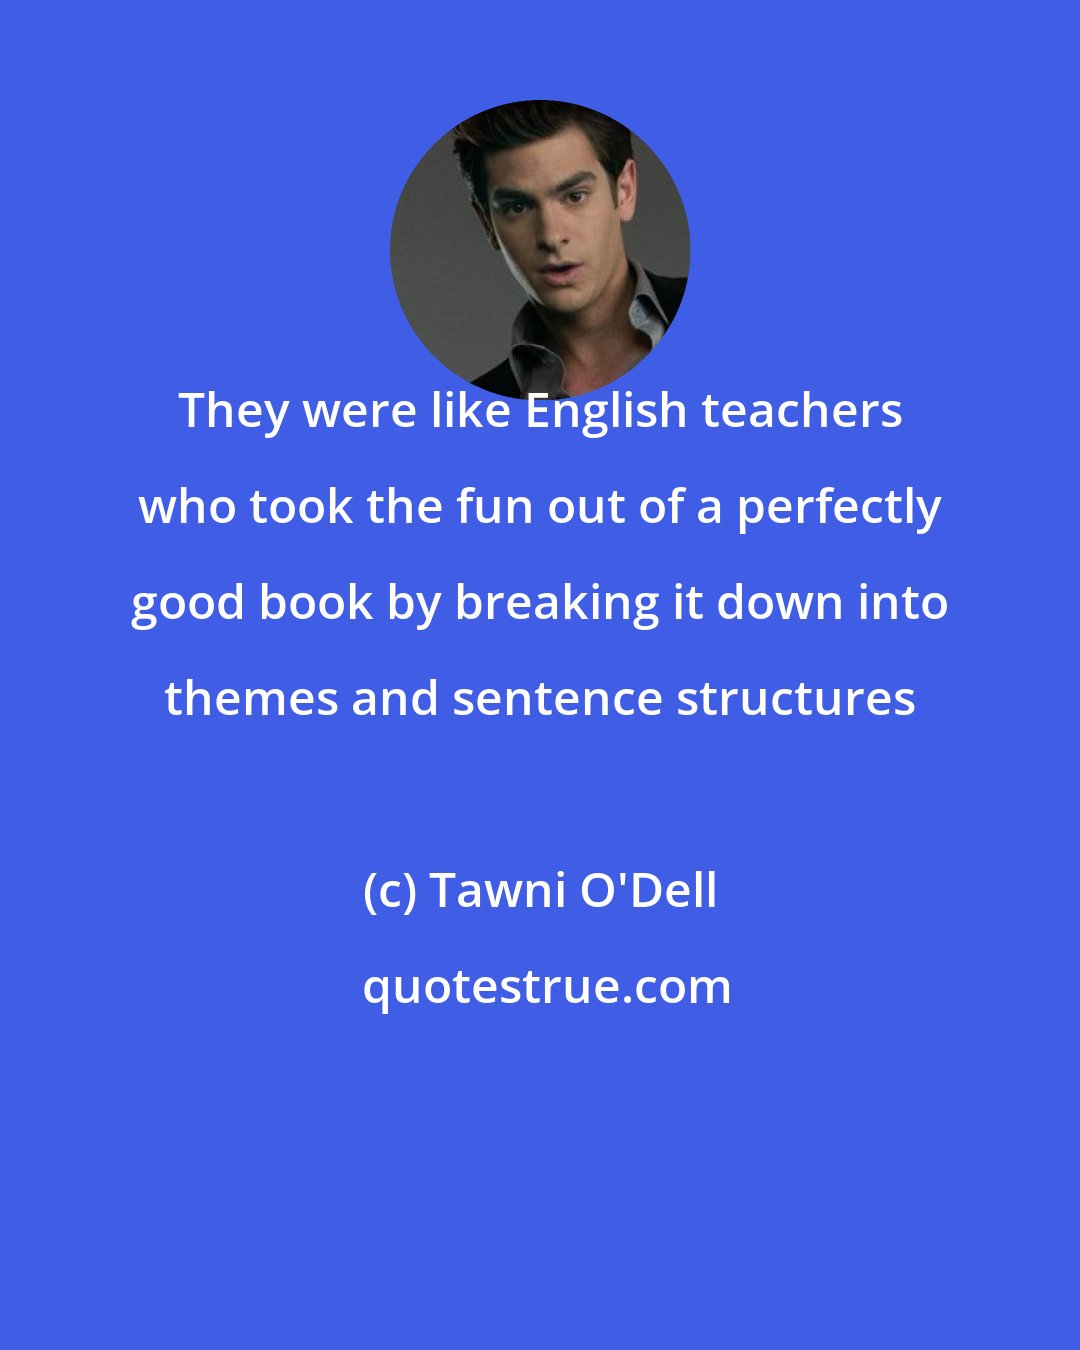 Tawni O'Dell: They were like English teachers who took the fun out of a perfectly good book by breaking it down into themes and sentence structures